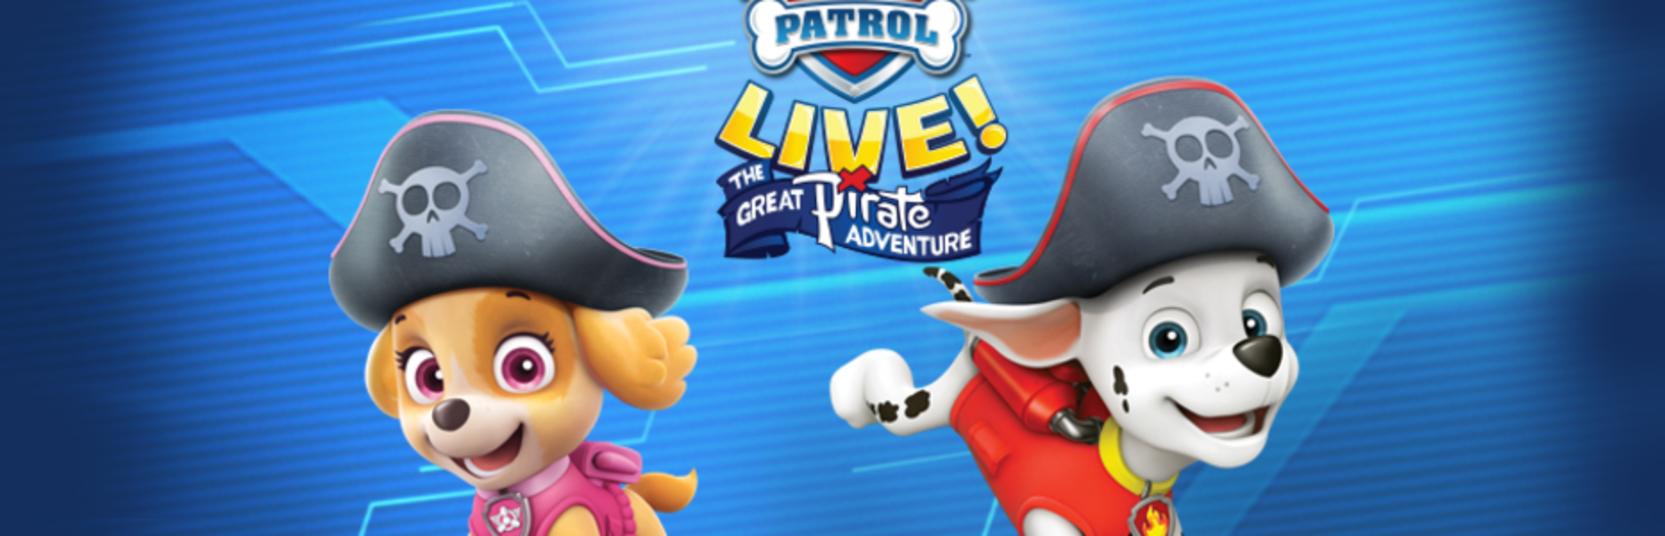 Paw Patrol Live! Comes to Beaumont, TX November 14-15, 2017